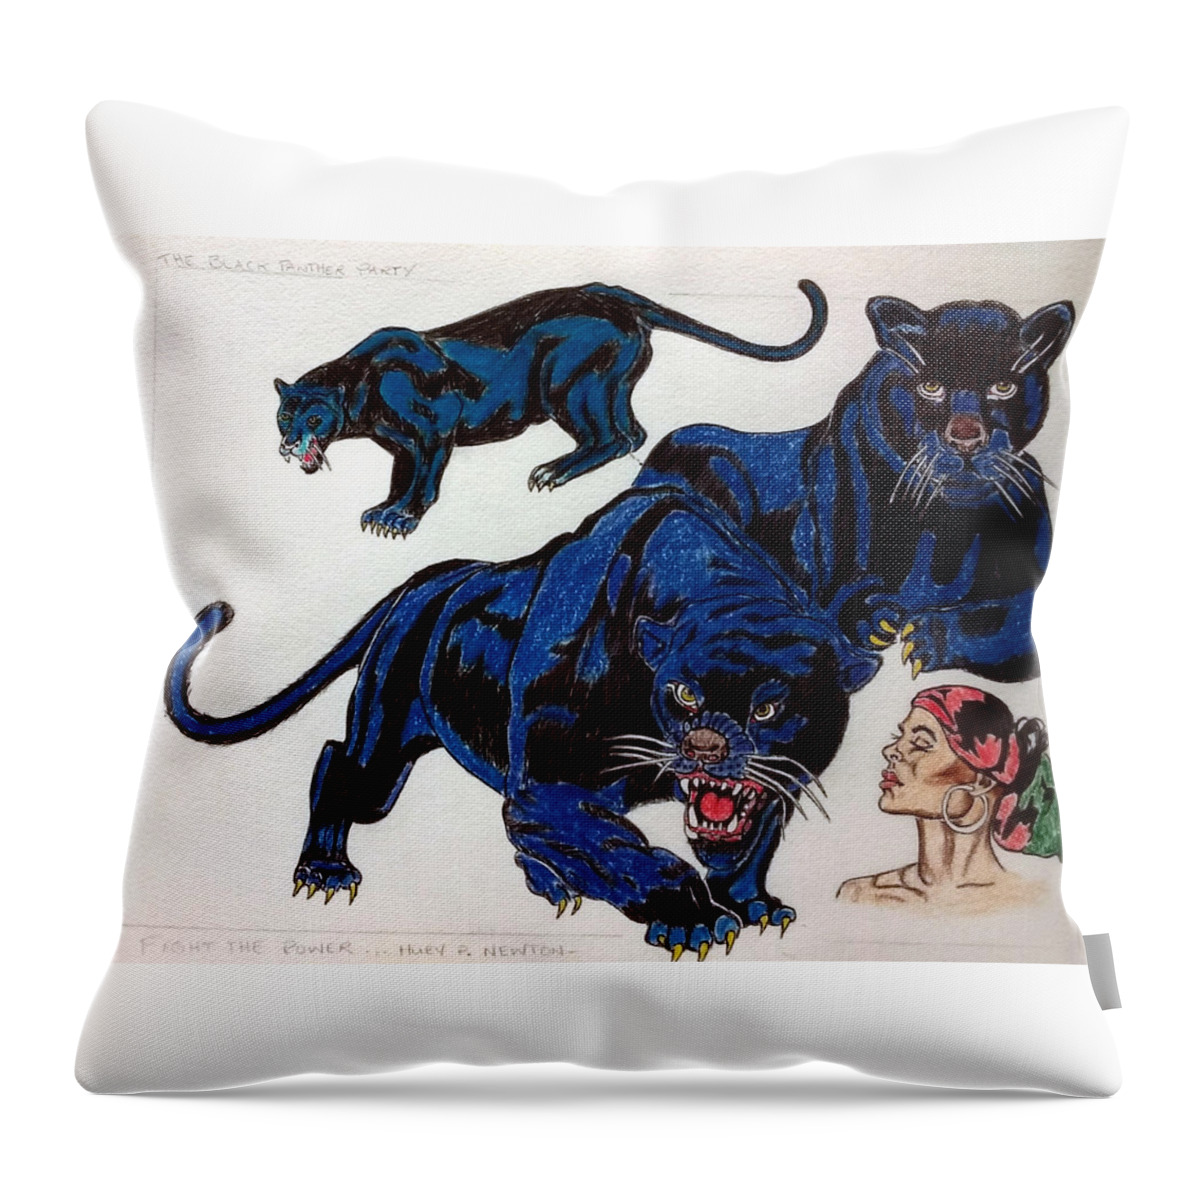 Black Art Throw Pillow featuring the drawing Serenade of the Black Panther by Joedee